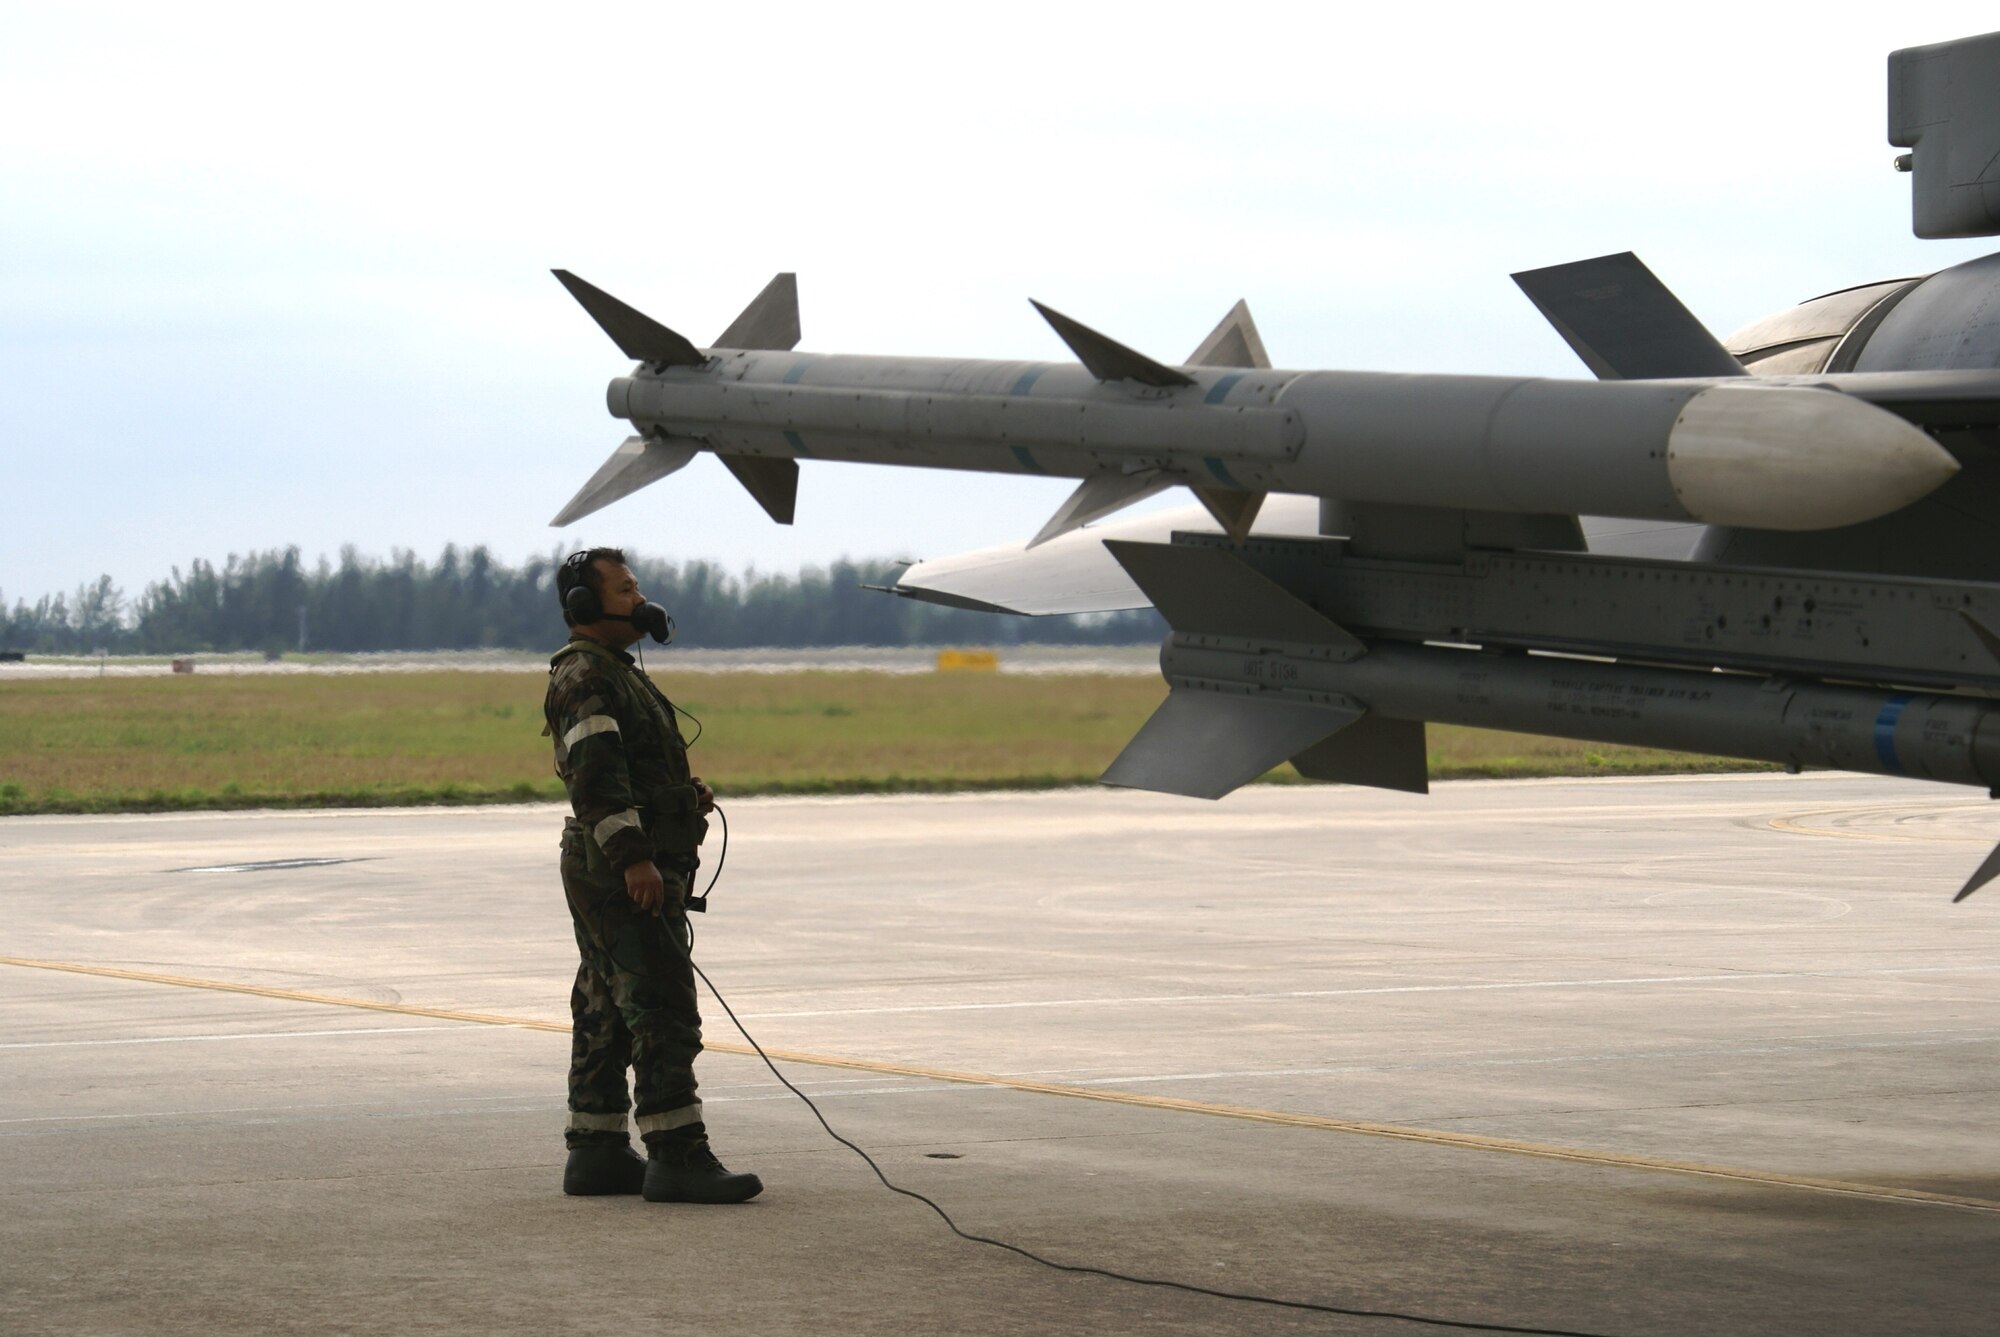 Tech. Sgt. Juan Guerra, 482nd Aircraft Maintenance Squadron, conducts pre-flight inspections of an F-16 during Operation Deliberate Tropic, Homestead Air Reserve Base, March 10, 2008.  The Operational Readiness Exercise is a self-assessment of the wing’s ability to perform in a simulated combat environment. Explosive devices, smoke grenades and sirens will be used during the exercise to create realistic scenarios that reservists will encounter during the exercise. “Homestead Air Reserve Base goes to great lengths to ensure safety procedures are established and followed during exercises to prepare our reservists for deployment,” said Mr. Sean Quinn, 482nd Mission Support Group Emergency Management Office. (U.S. Air Force photo/Tim Norton)